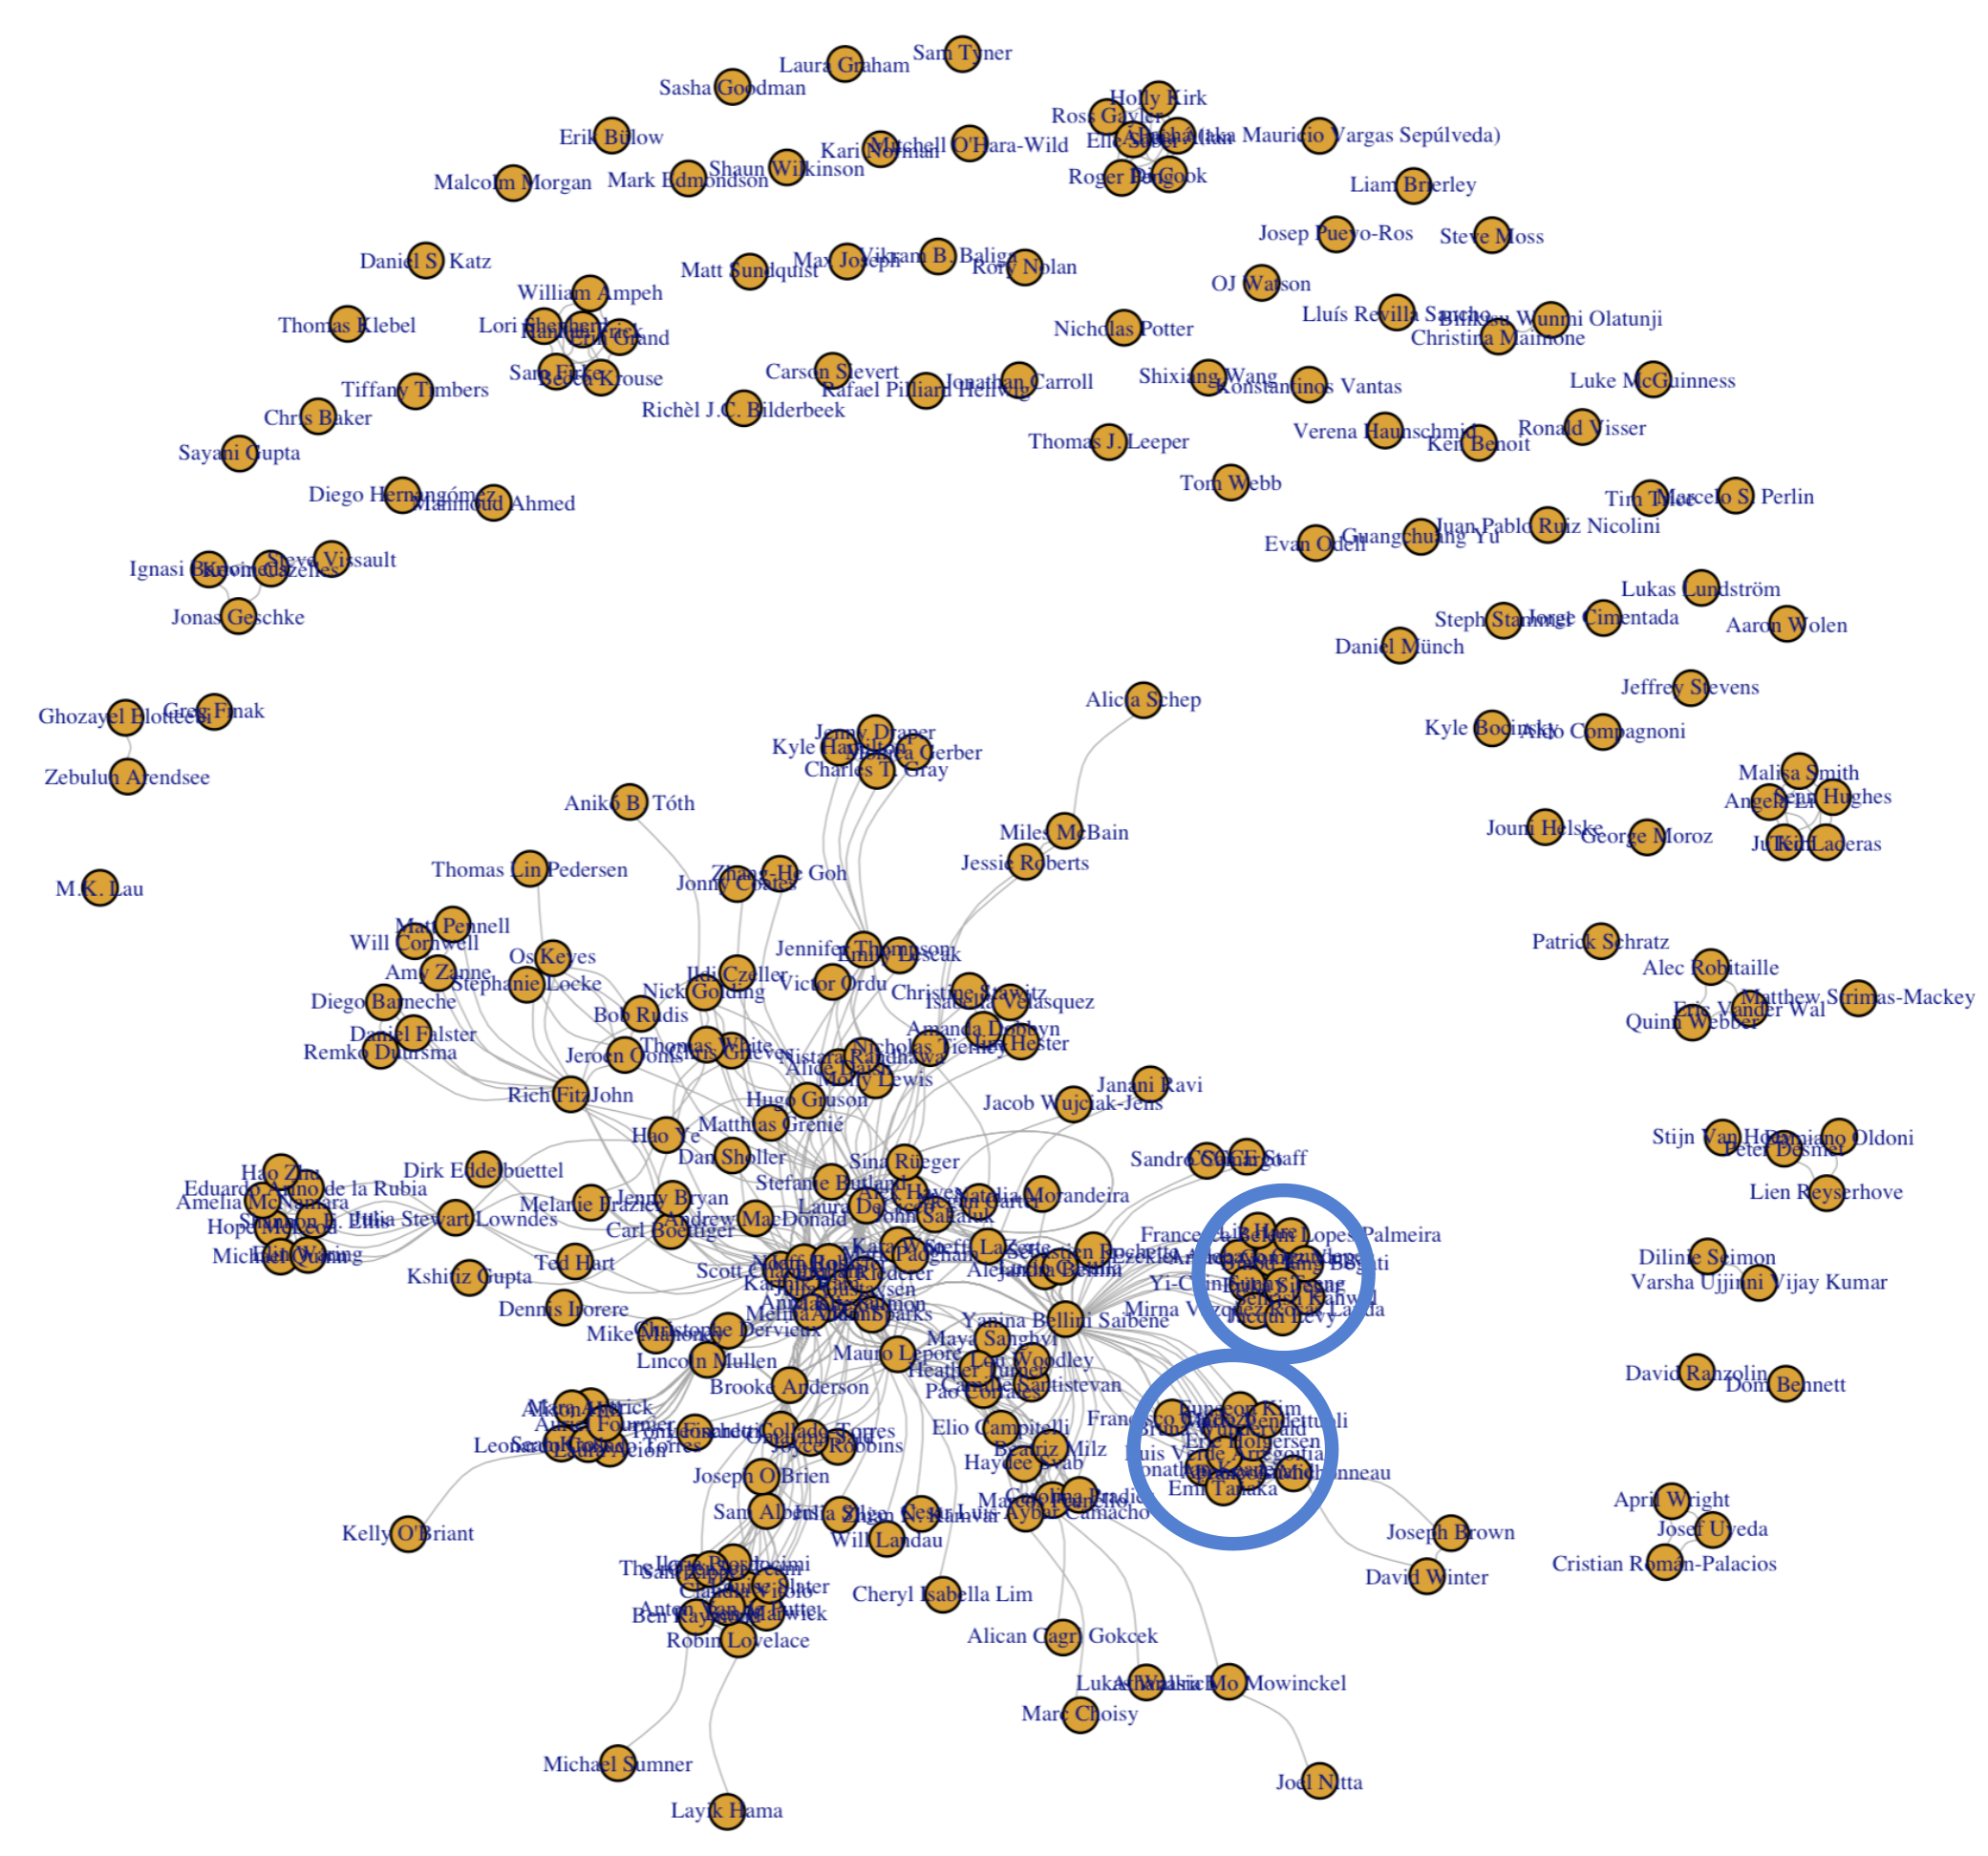 Blog post authors network from 2014 to 2024. The network have 253 nodes and 1147 edges. Have two very differentiate parts, one with their members with high connection between them and the other with small cluster of two to six nodes, but not connected to the more dense network. It also have severals nodes without connection to any other node of the network.